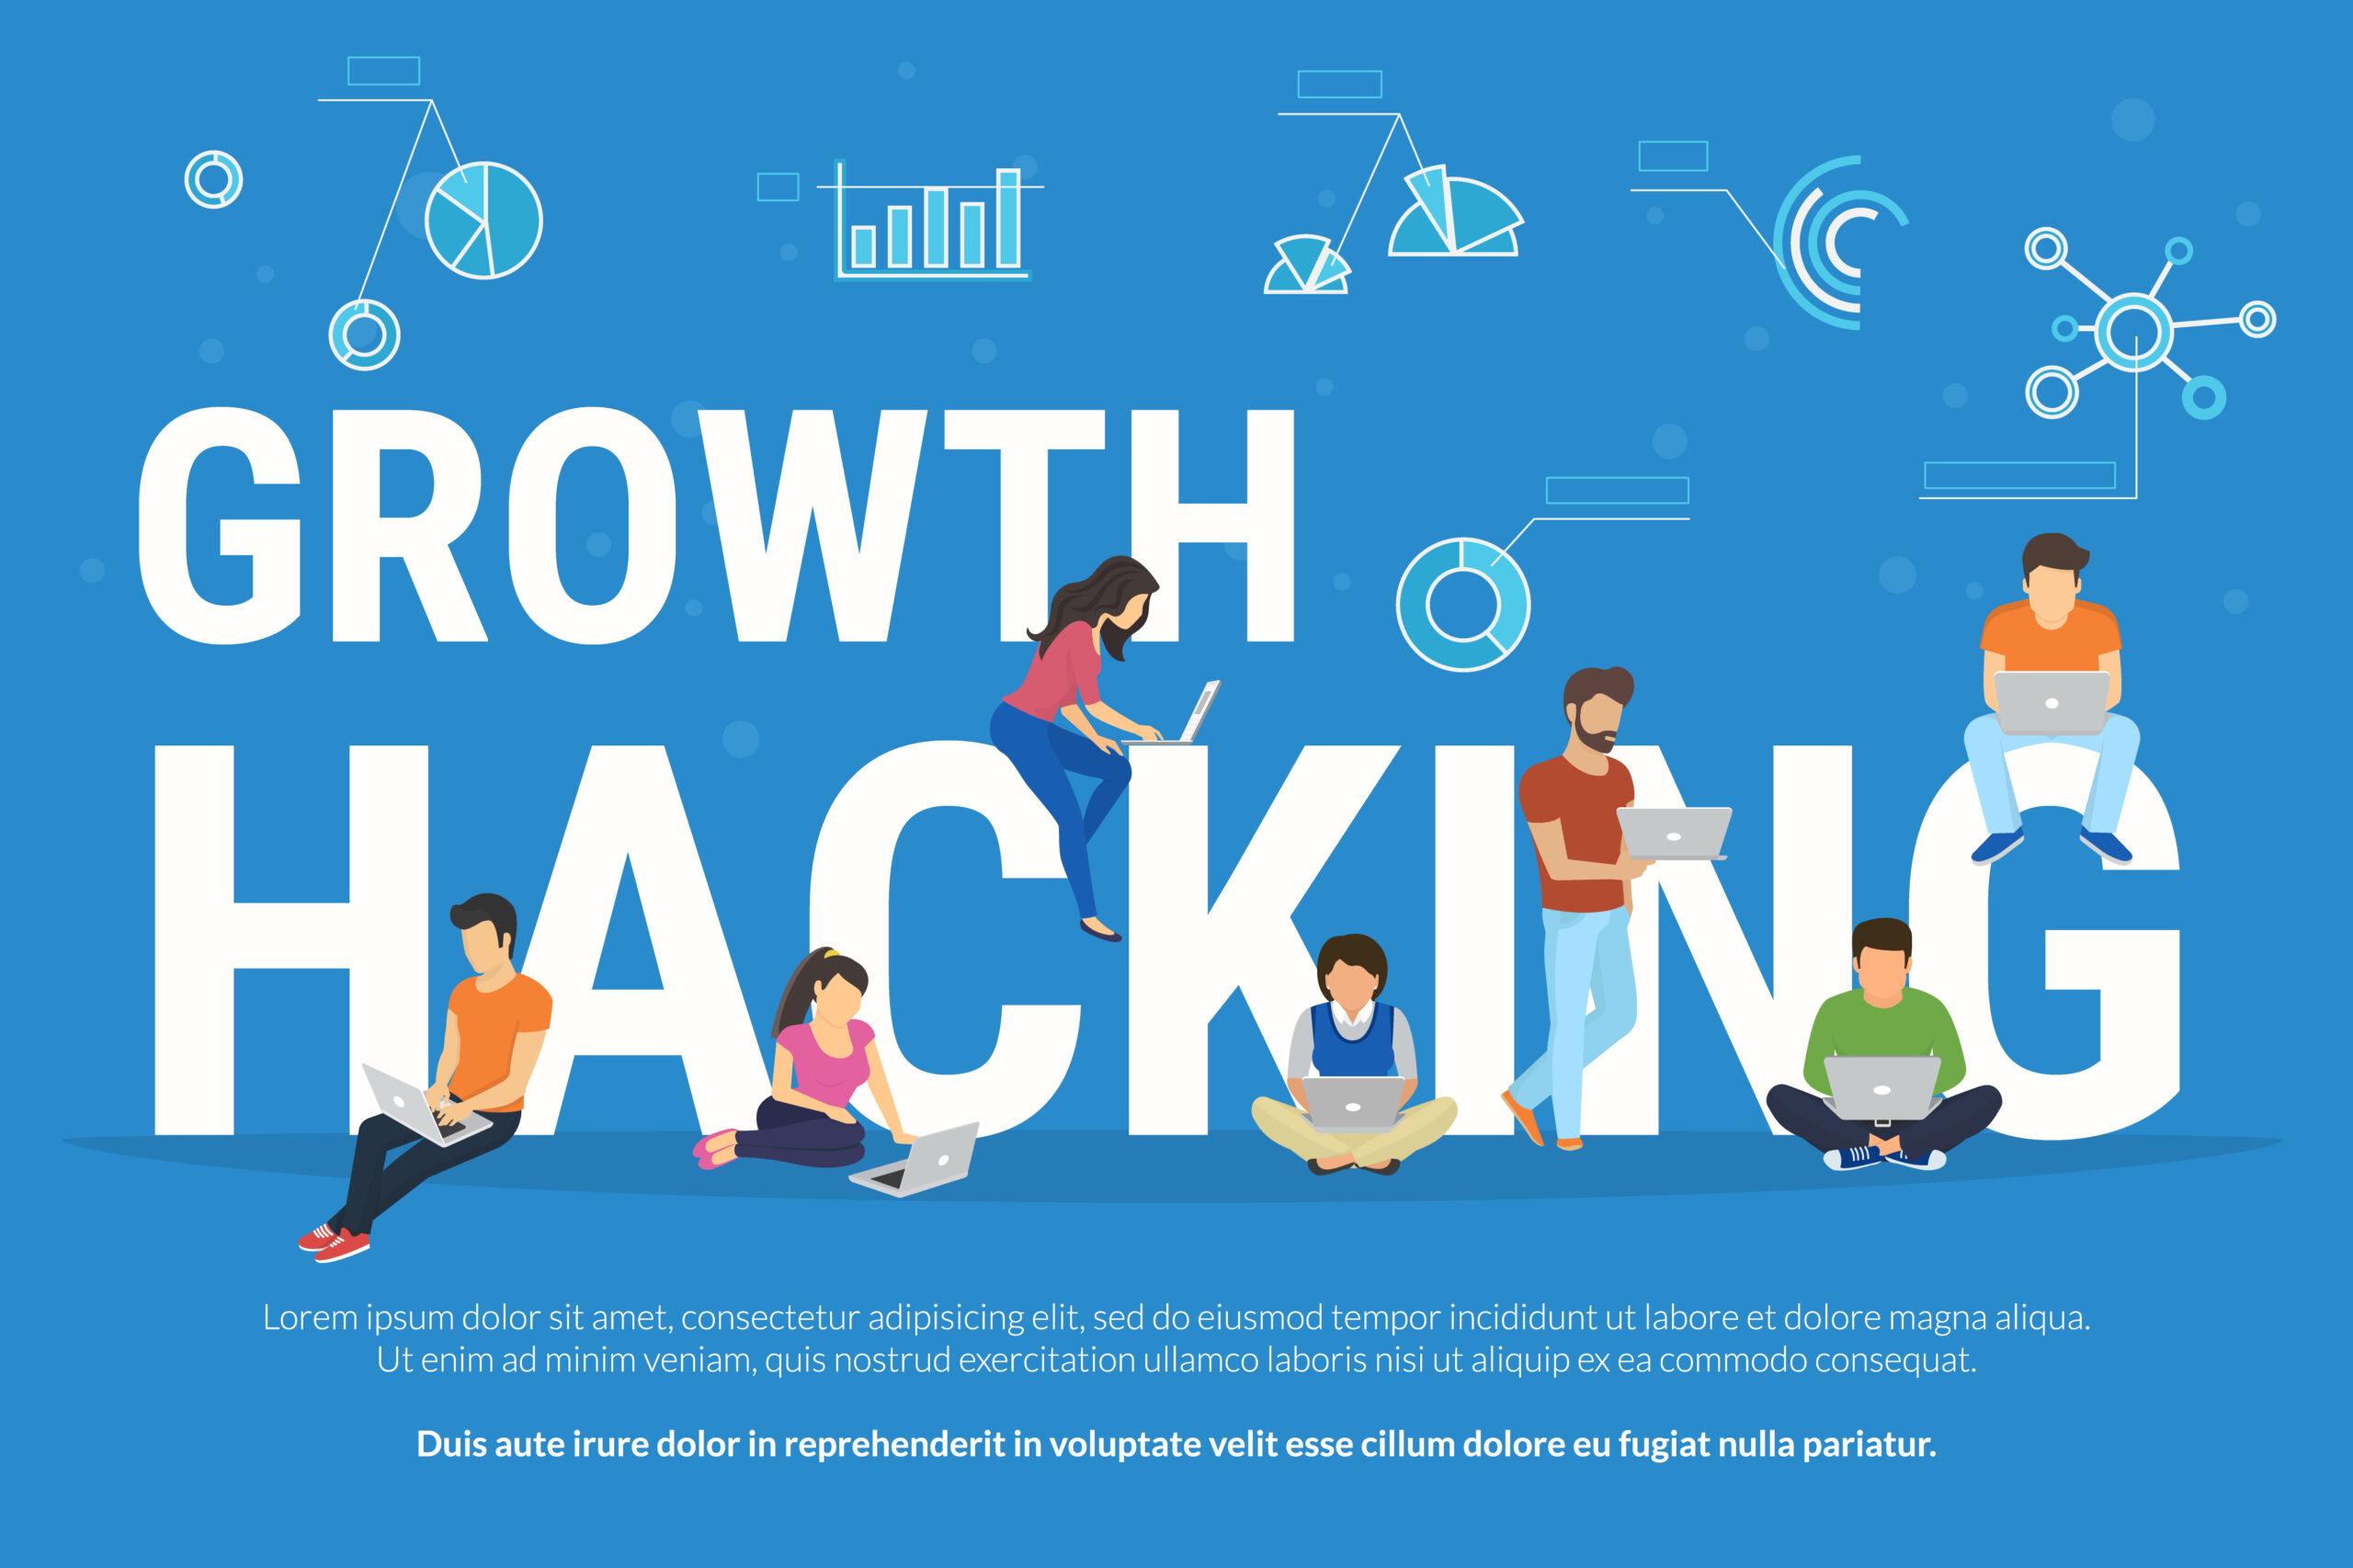 Growth hacking with performance PR